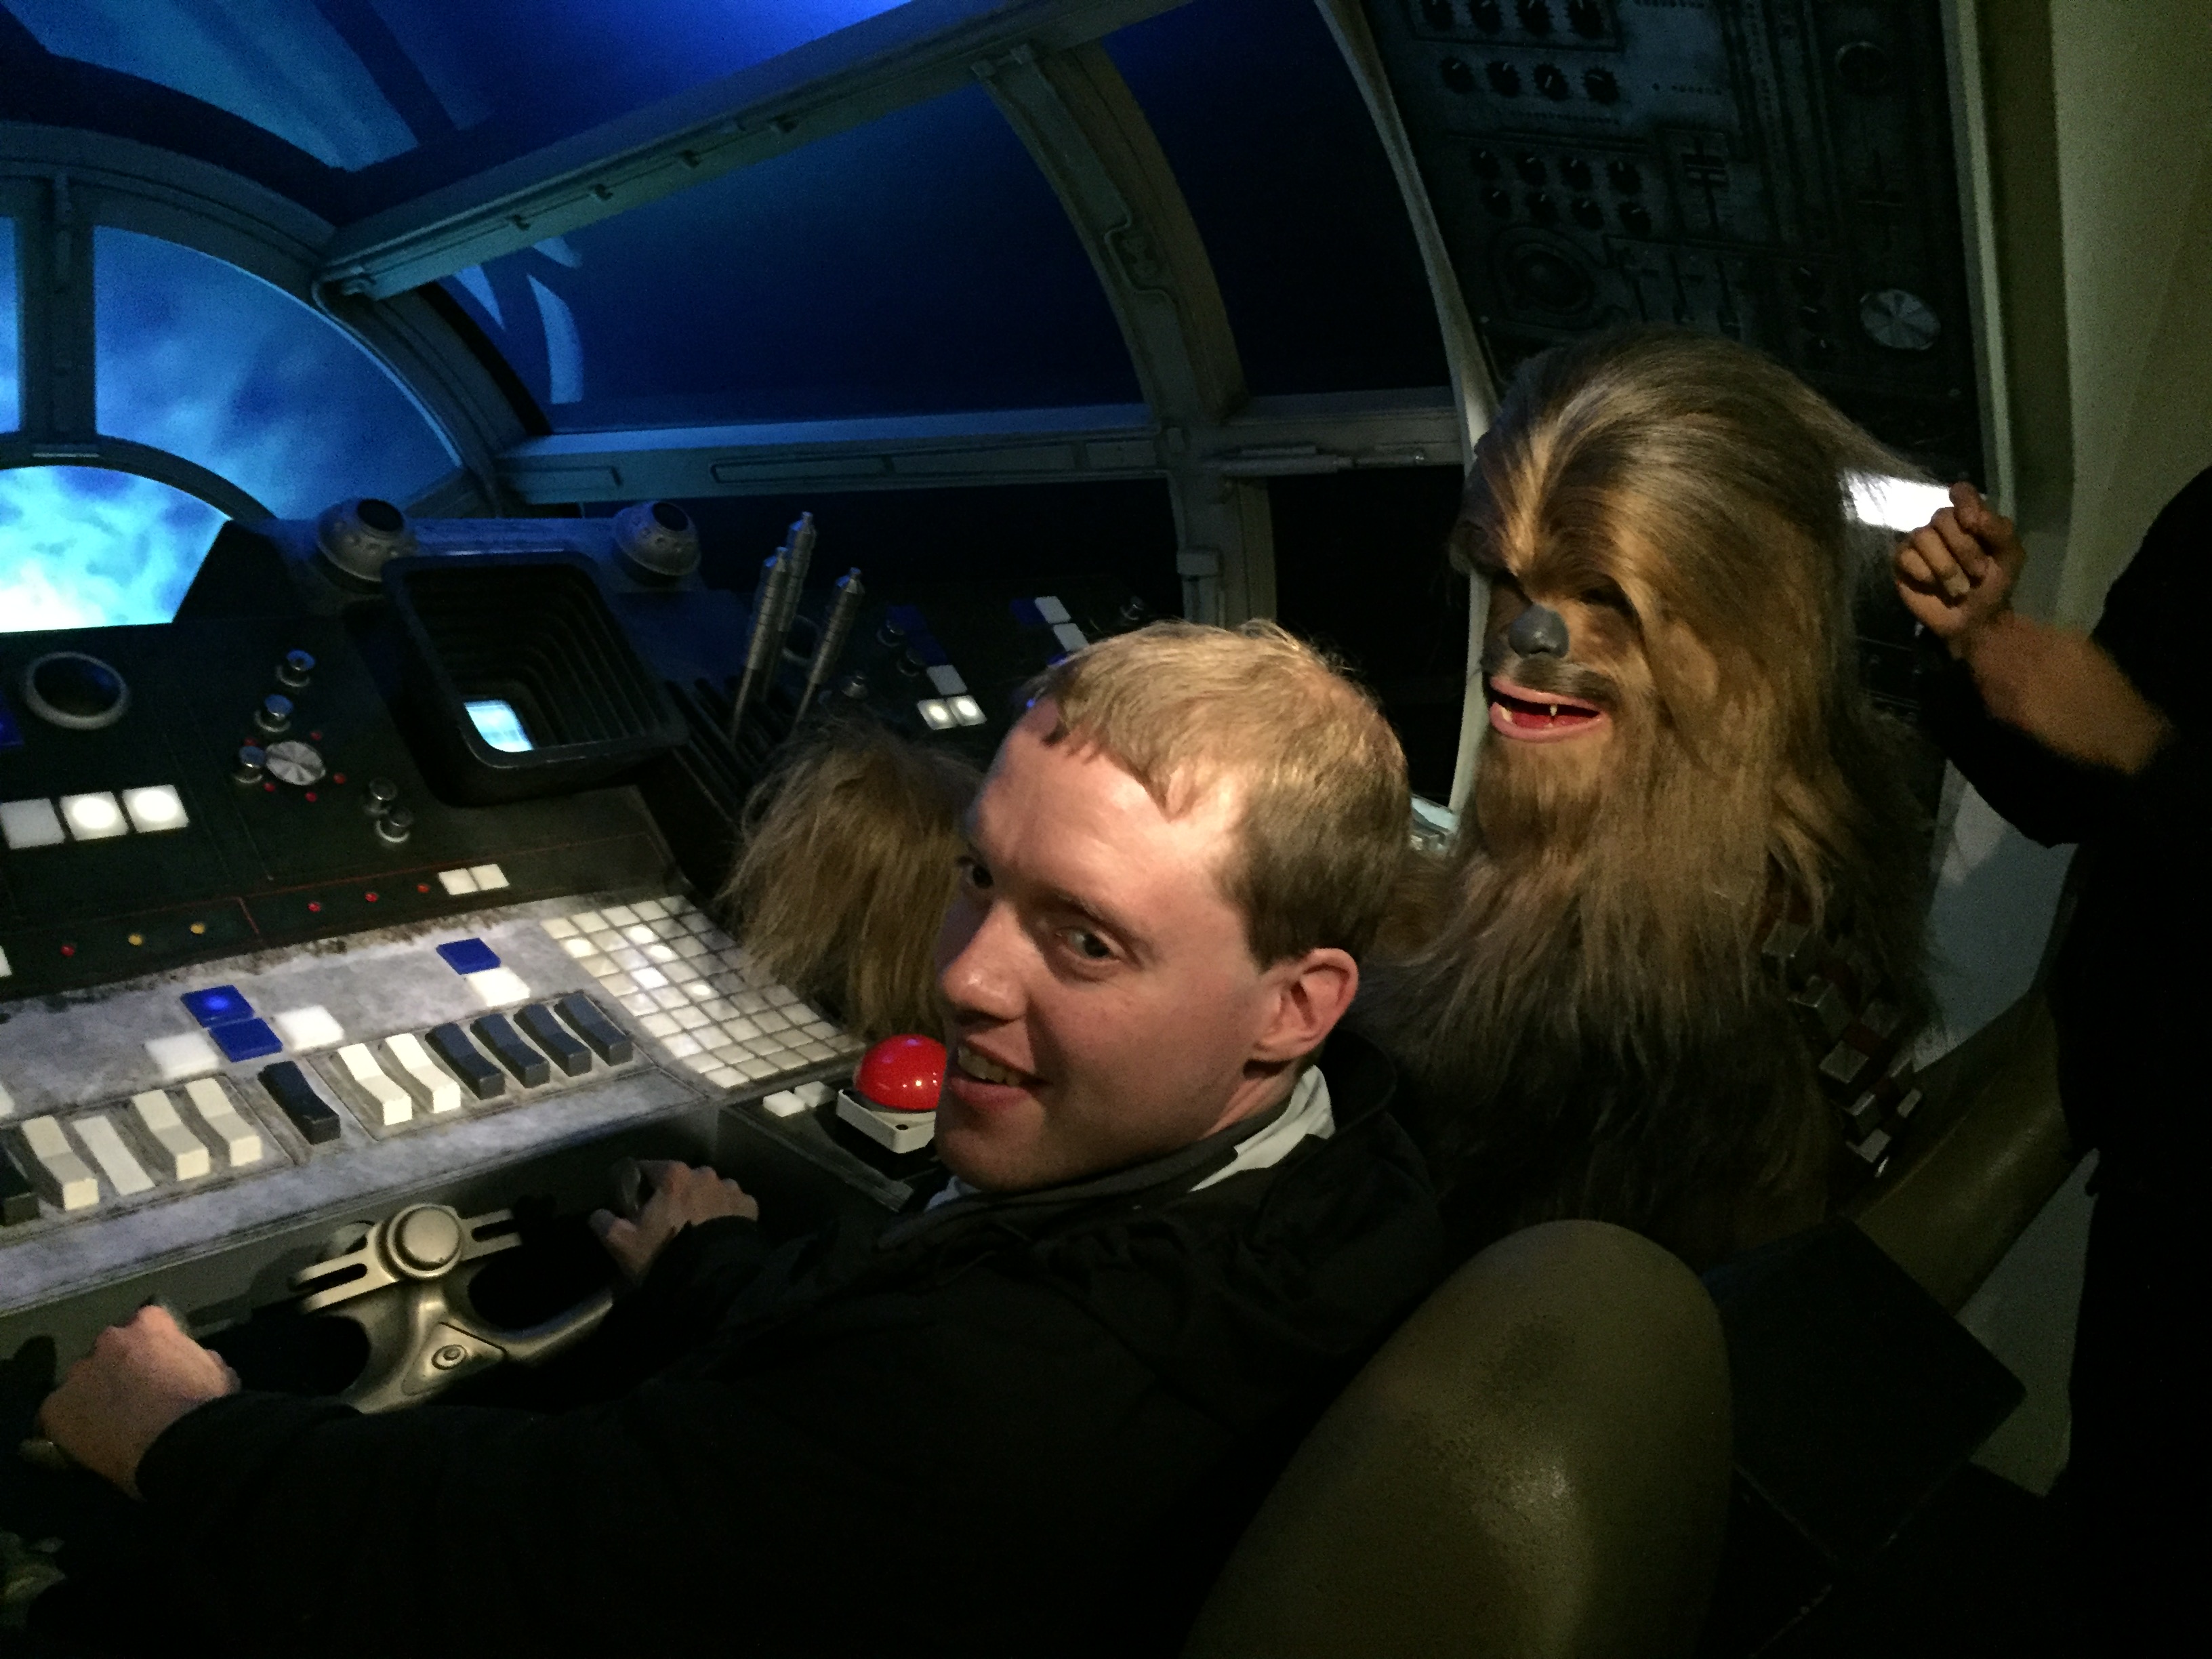 Glen sitting in the driving seat of the Millennium Falcon from Star Wars, with a waxwork of Chewbacca, a large and very hairy creature, in the seat next to him.